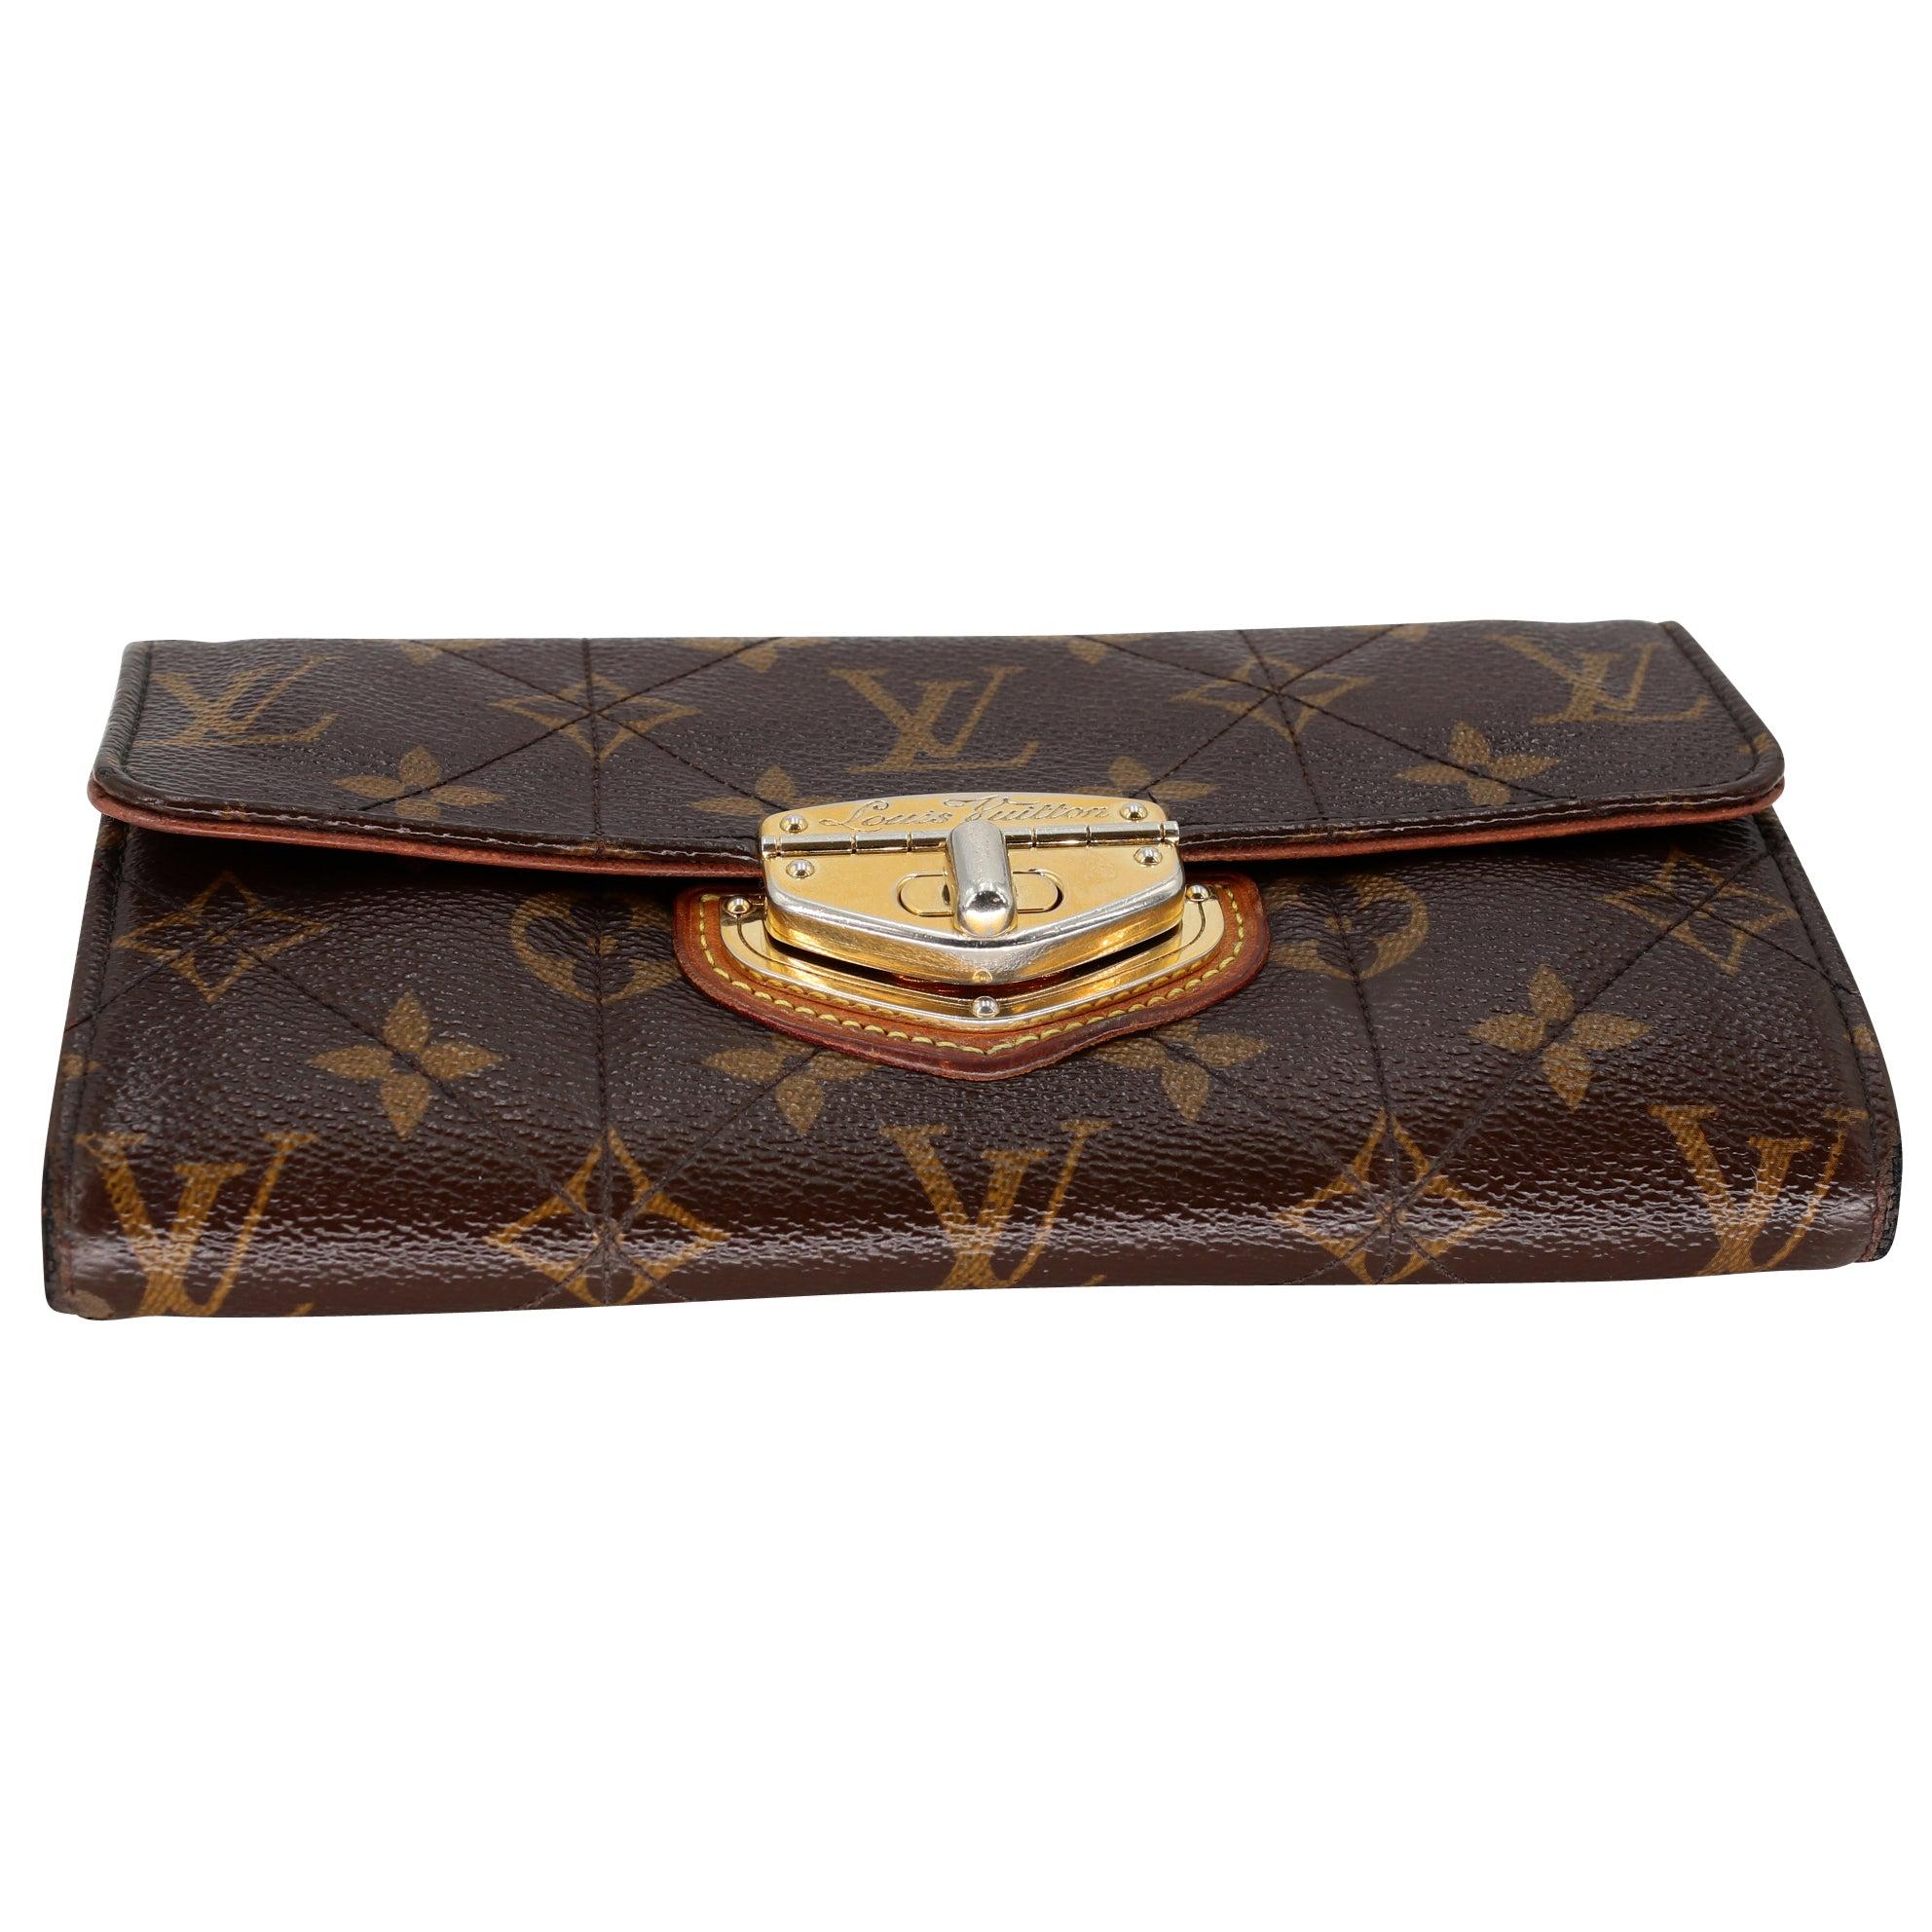 Louis Vuitton Etoile Porte Quilted Sarah Flap Wallet LV-W1110P-A003 In Good Condition For Sale In Downey, CA